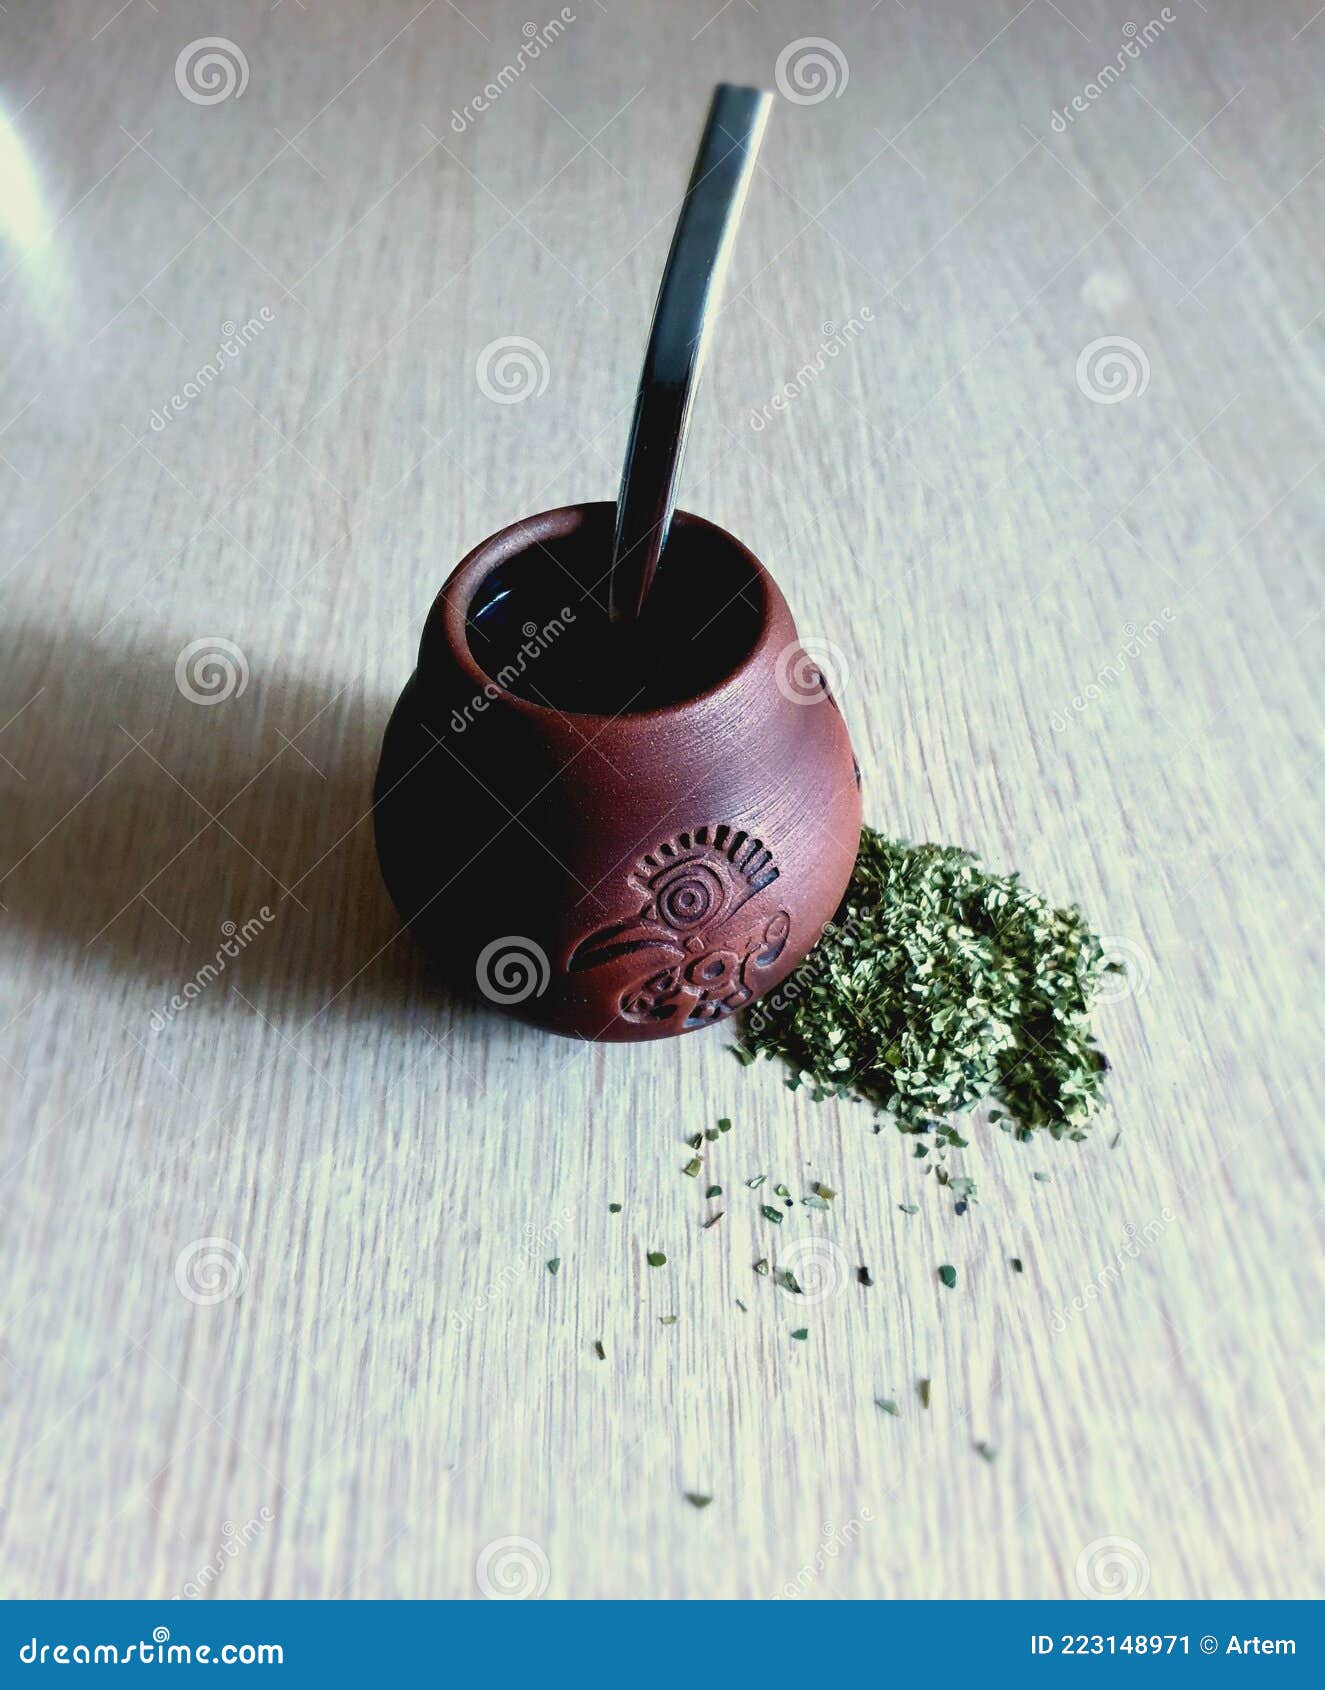 mate drink, calabash and bombillo